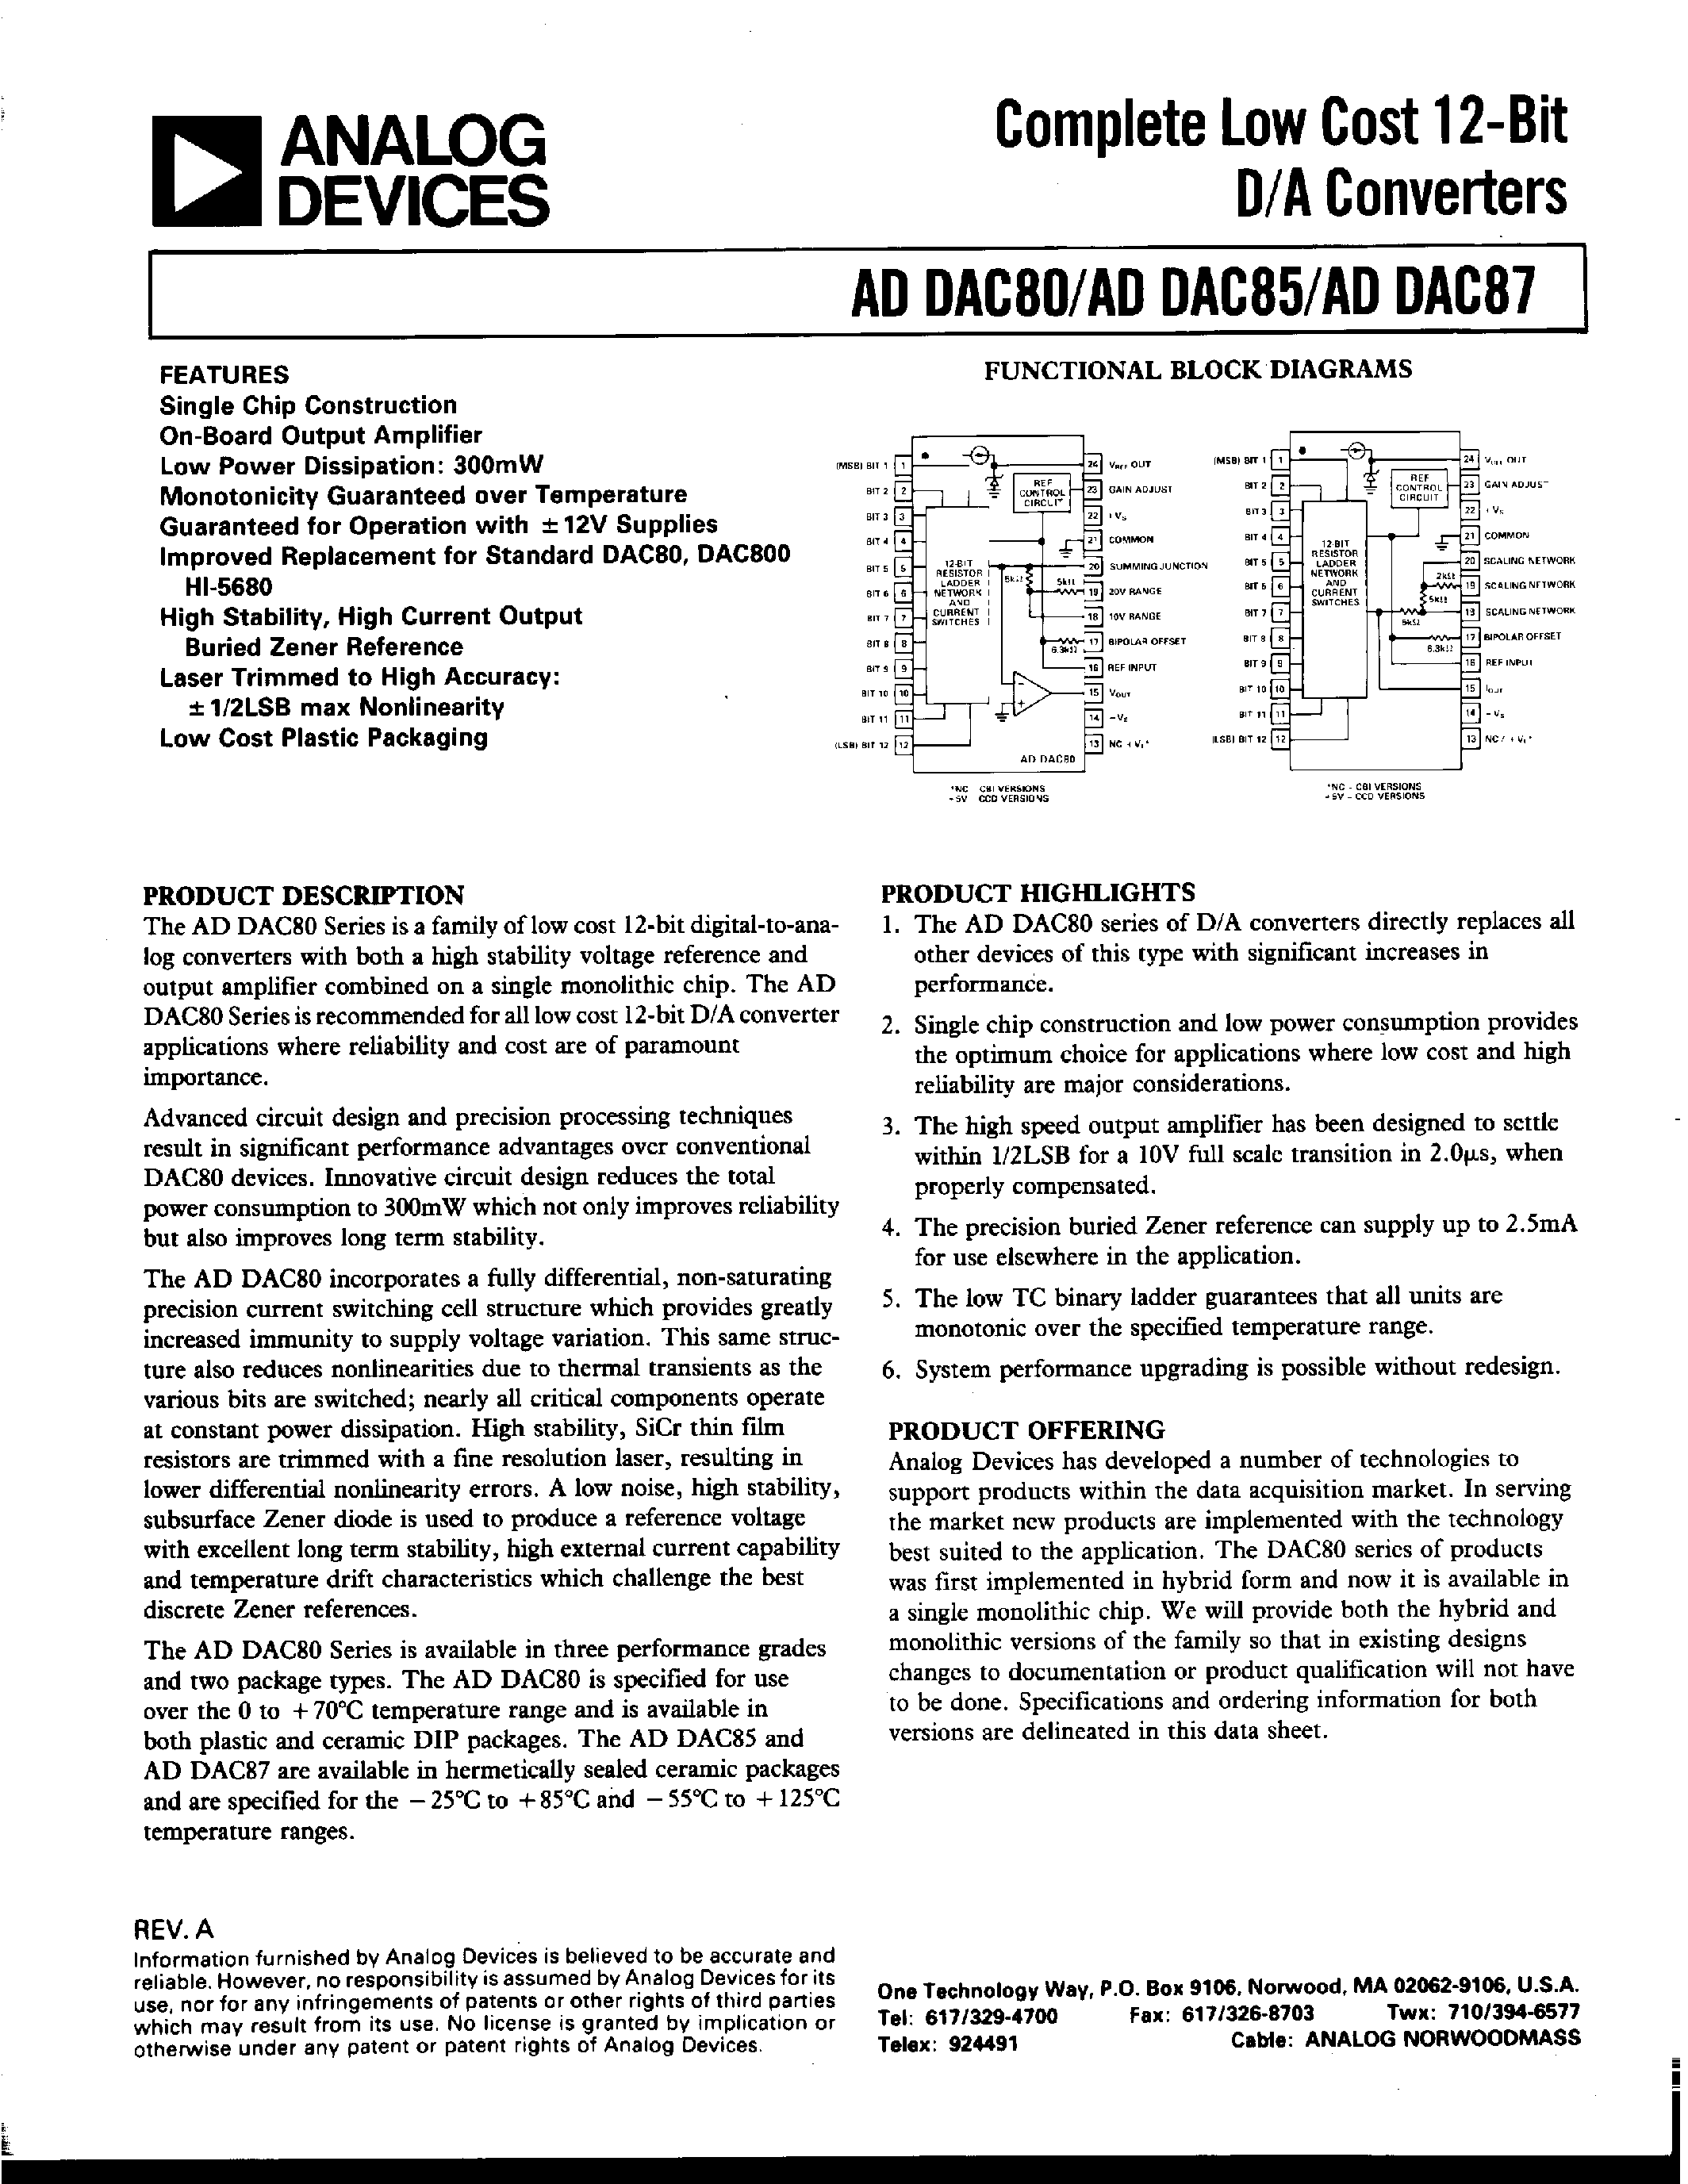 Datasheet ADDAC85-CCD-I - COMPLETE LOW COST 12-BIT D/A CONVERTERS page 1